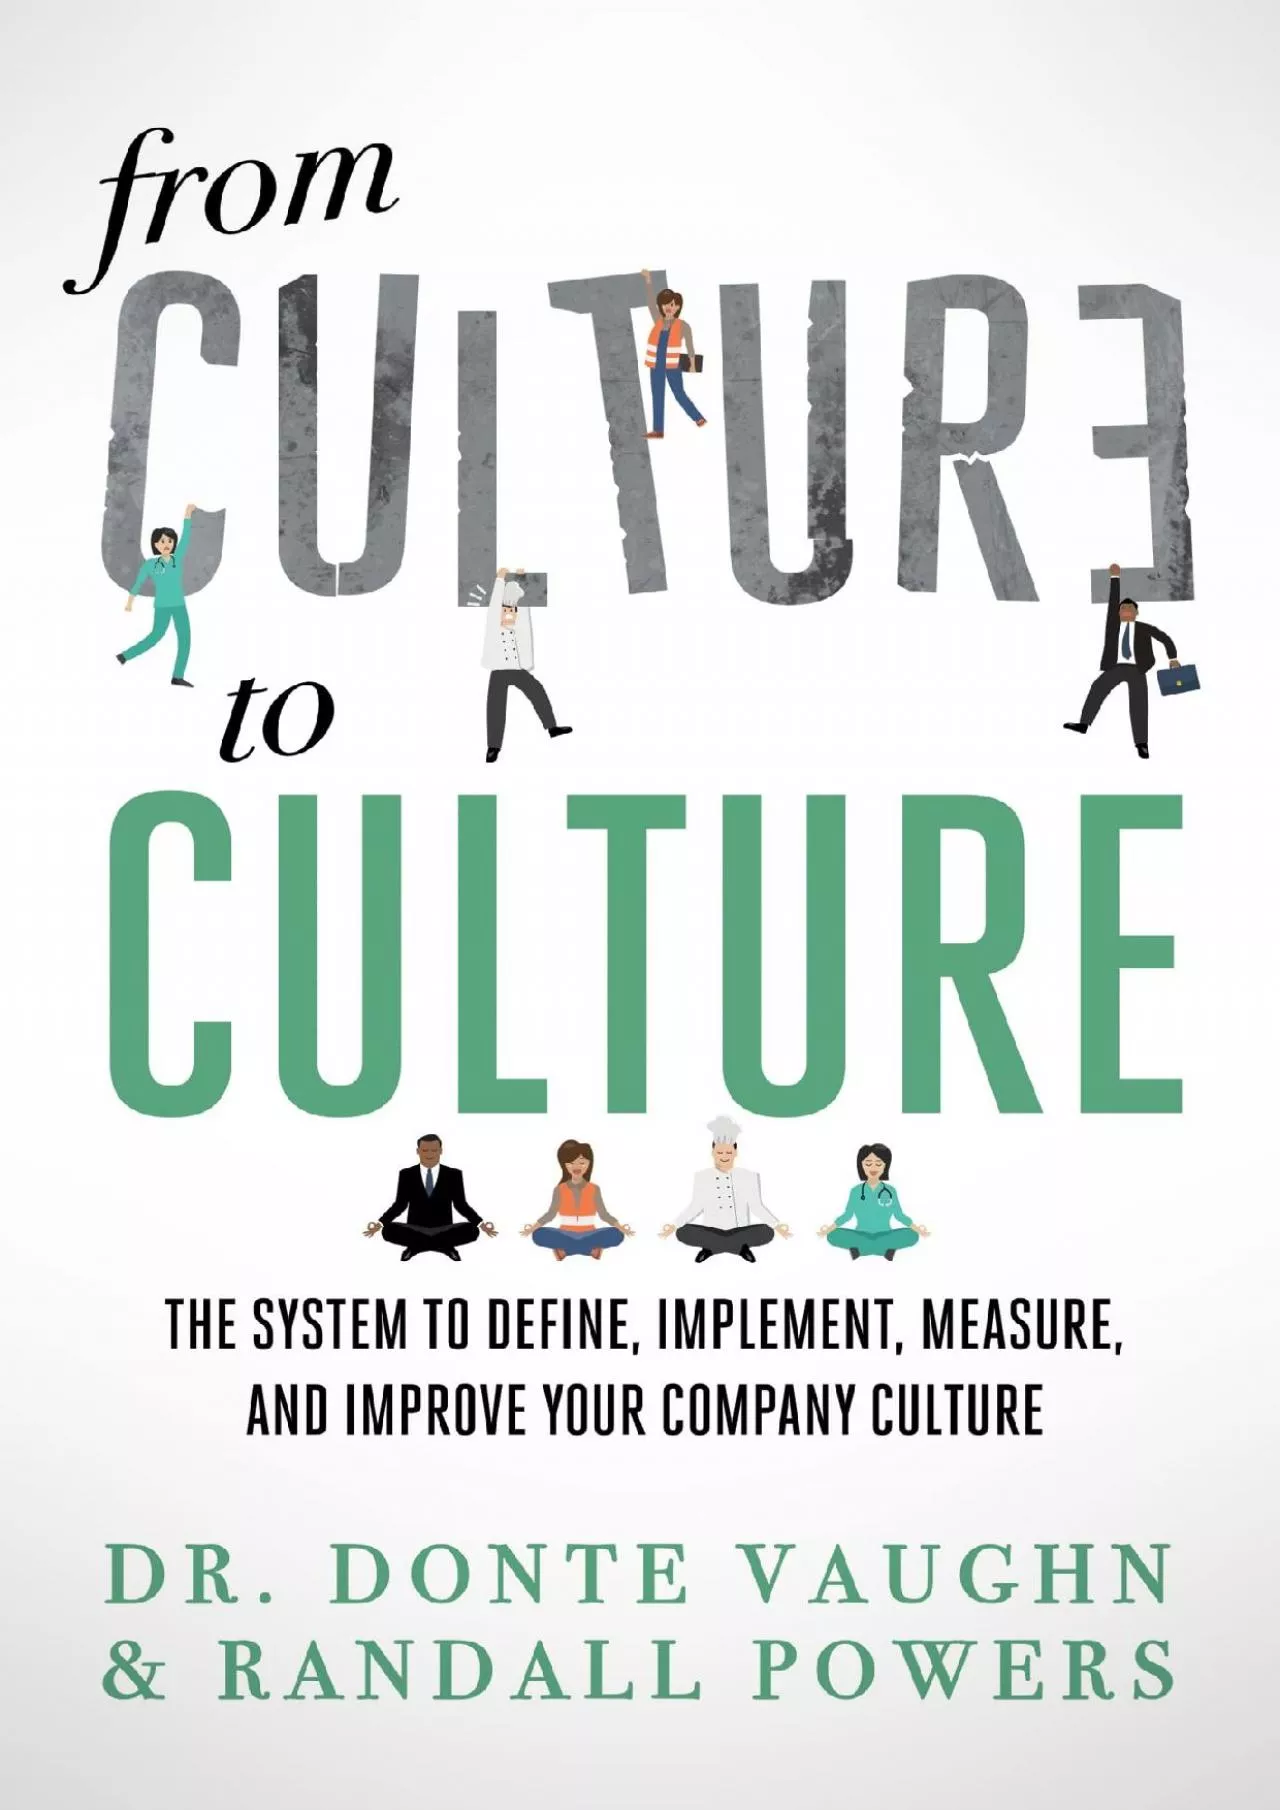 (DOWNLOAD)-From CULTURE to CULTURE: The System to Define, Implement, Measure, and Improve